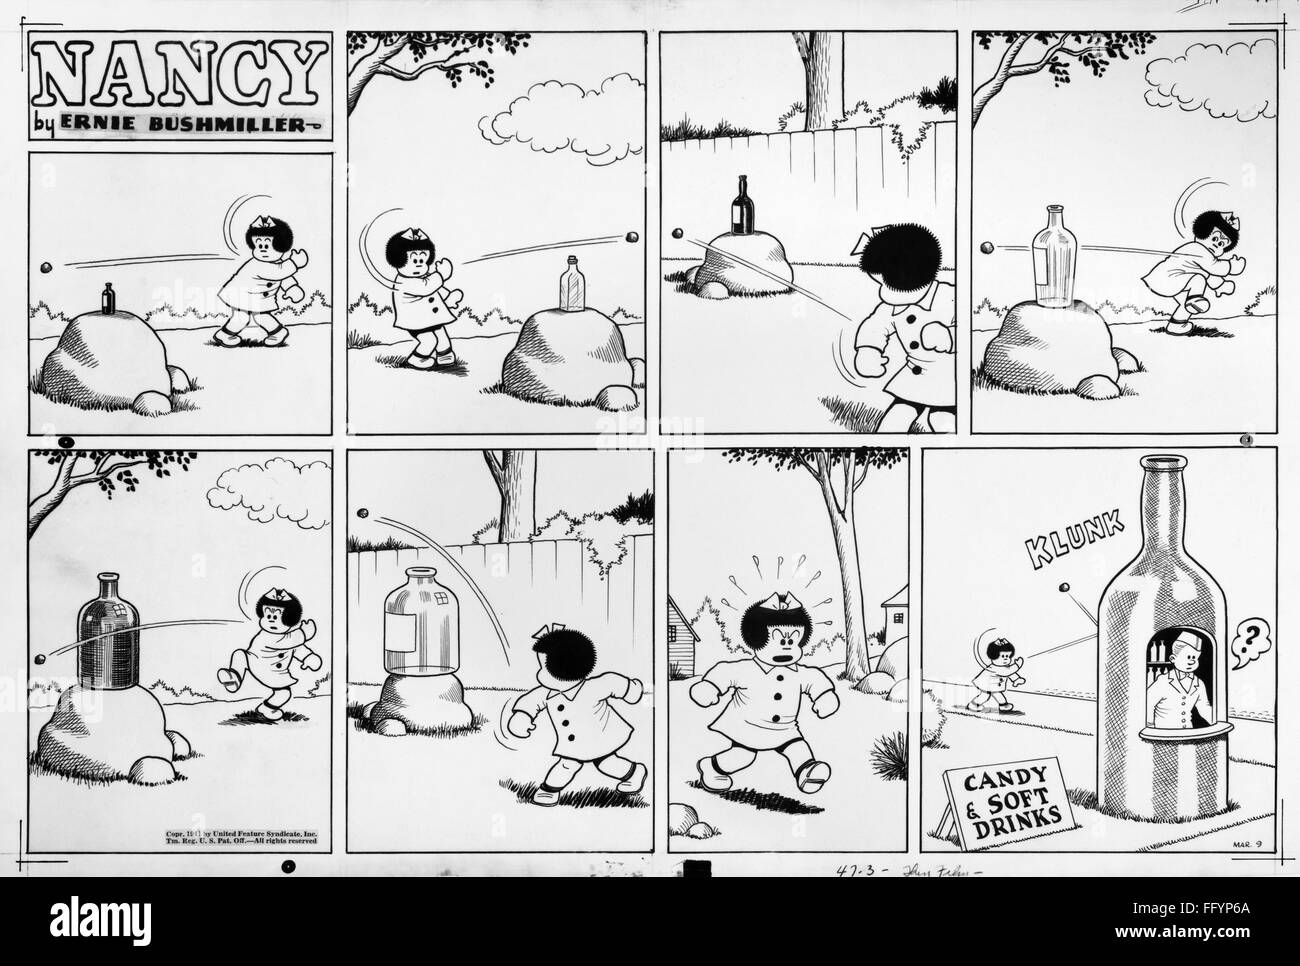 COMIC STRIP: NANCY, 1941. /nComic strip showing the character, Nancy, trying to hit a bottle with a rock, by Ernie Bushmiller, 9 March 1941. Stock Photo